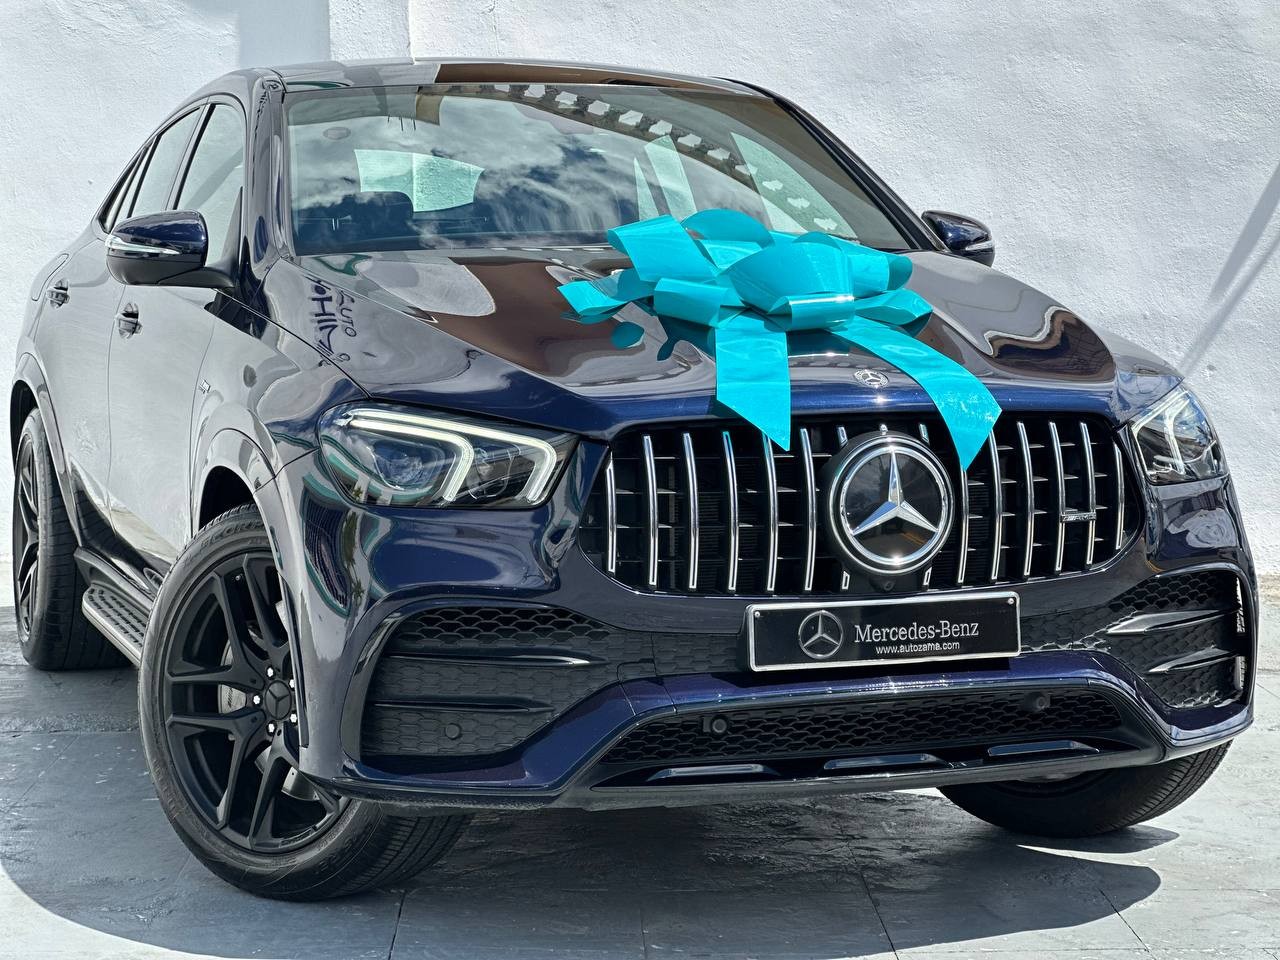 jeepetas y camionetas - MERCEDES-BENZ CLASE GLE 53 4MATIC COUPE 2020 0